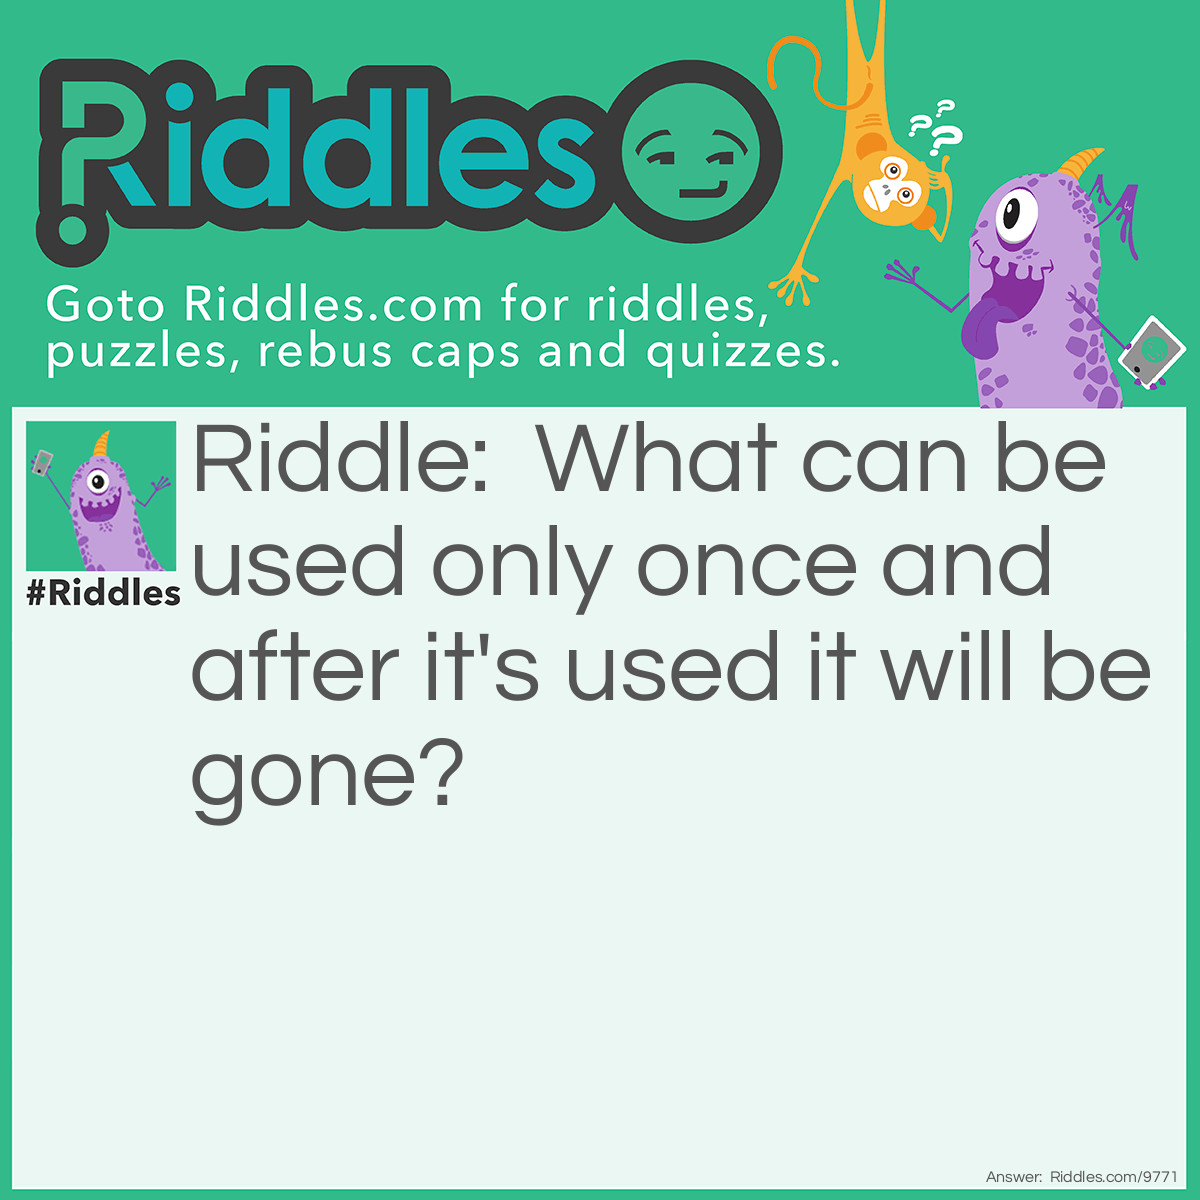 Riddle: What can be used only once and after it's used it will be gone? Answer: A bomb!